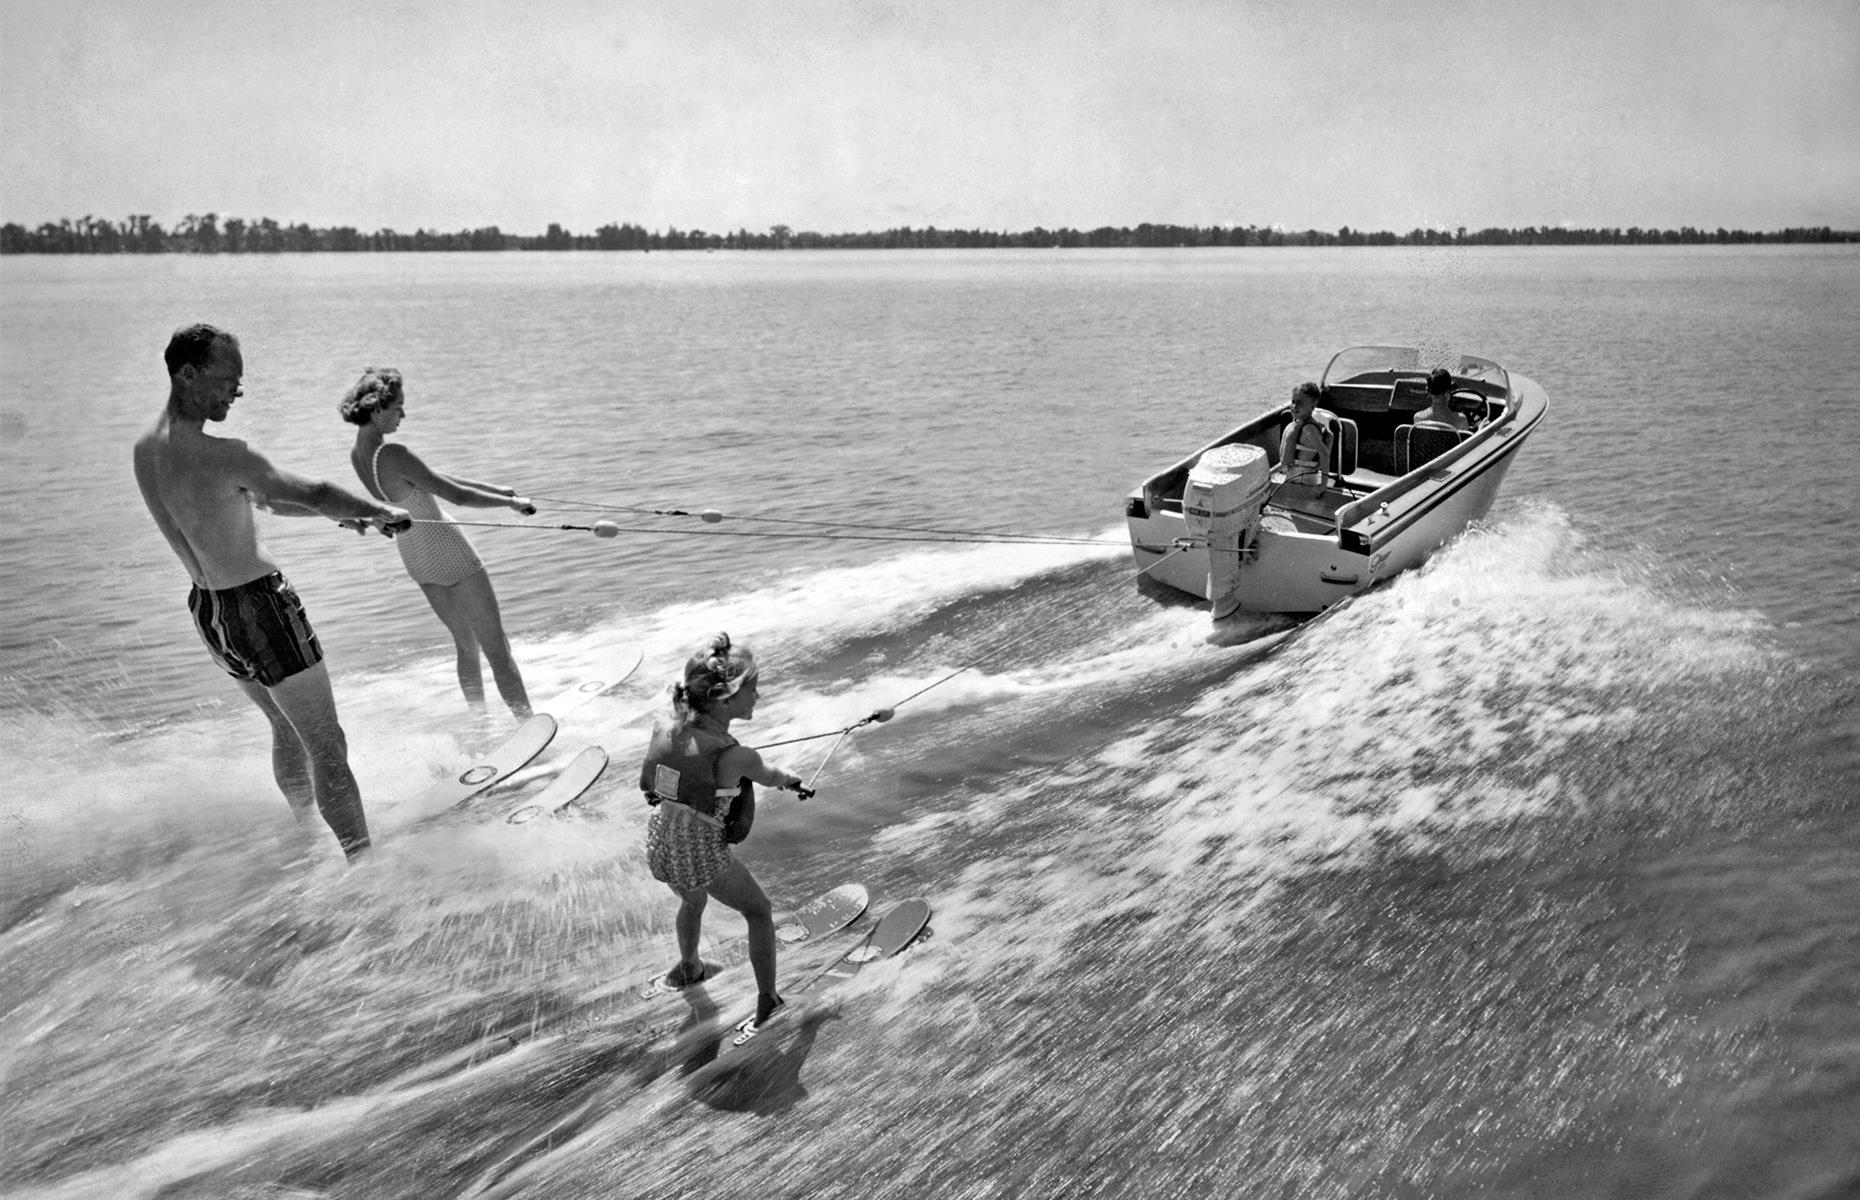 Eventually Cypress Gardens was hailed as the "Water-Ski Capital of the World" and tourists would come to enjoy the sport for themselves. Even showbiz heavyweights such as Elvis Presley came here to make a splash during the park's heyday. This water-skiing clan was snapped in the 1950s.